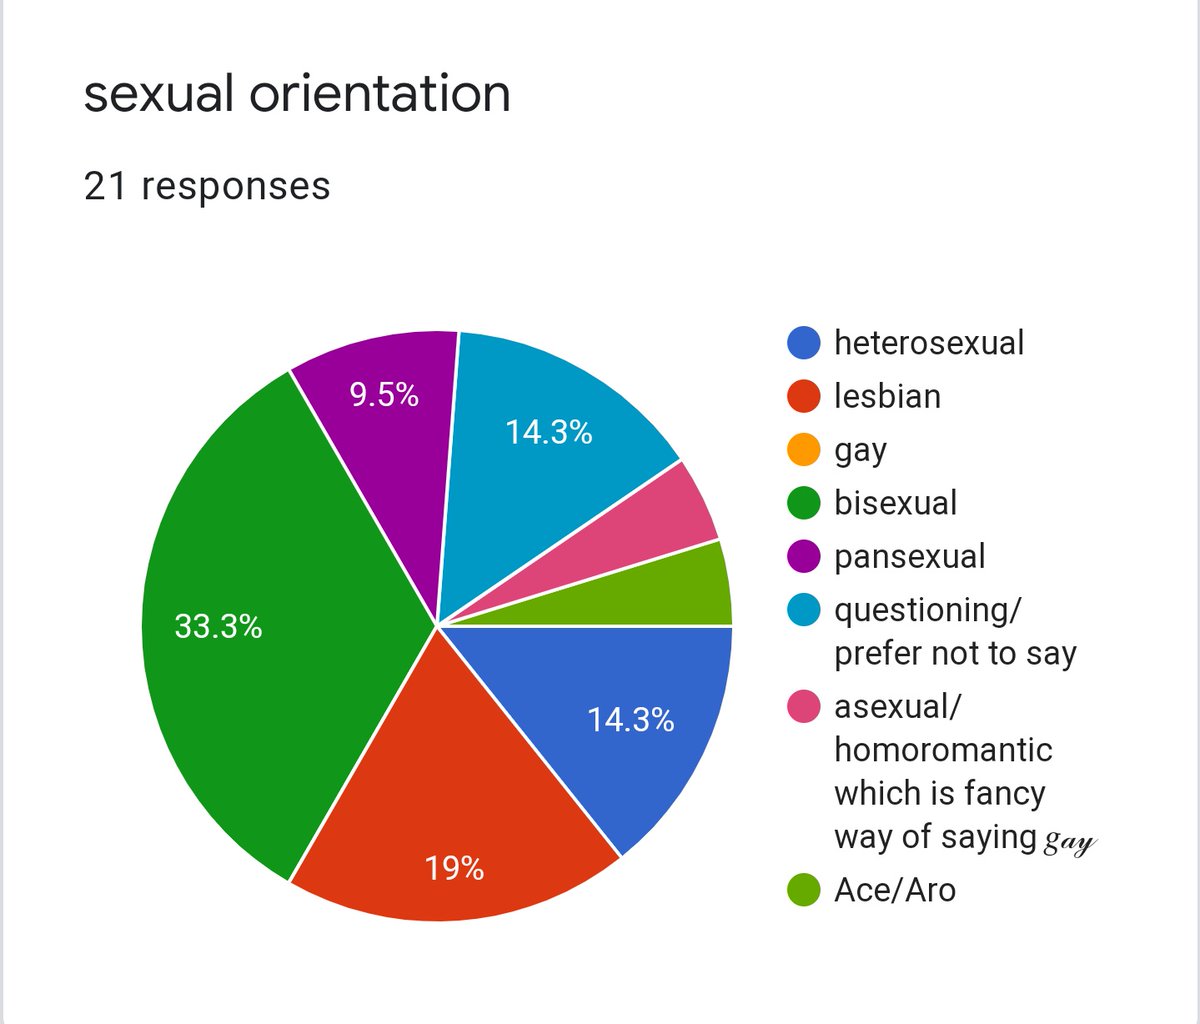 THE MEMBER WITH THE MOST HETEROSEXUAL STANS#4 JAEHYEONGheterosexual: 14.3%lesbian: 19%gay: 0%bisexual: 33.3%pansexual: 9.5%questioning/prefer not to say: 14.3%other: 9.6%